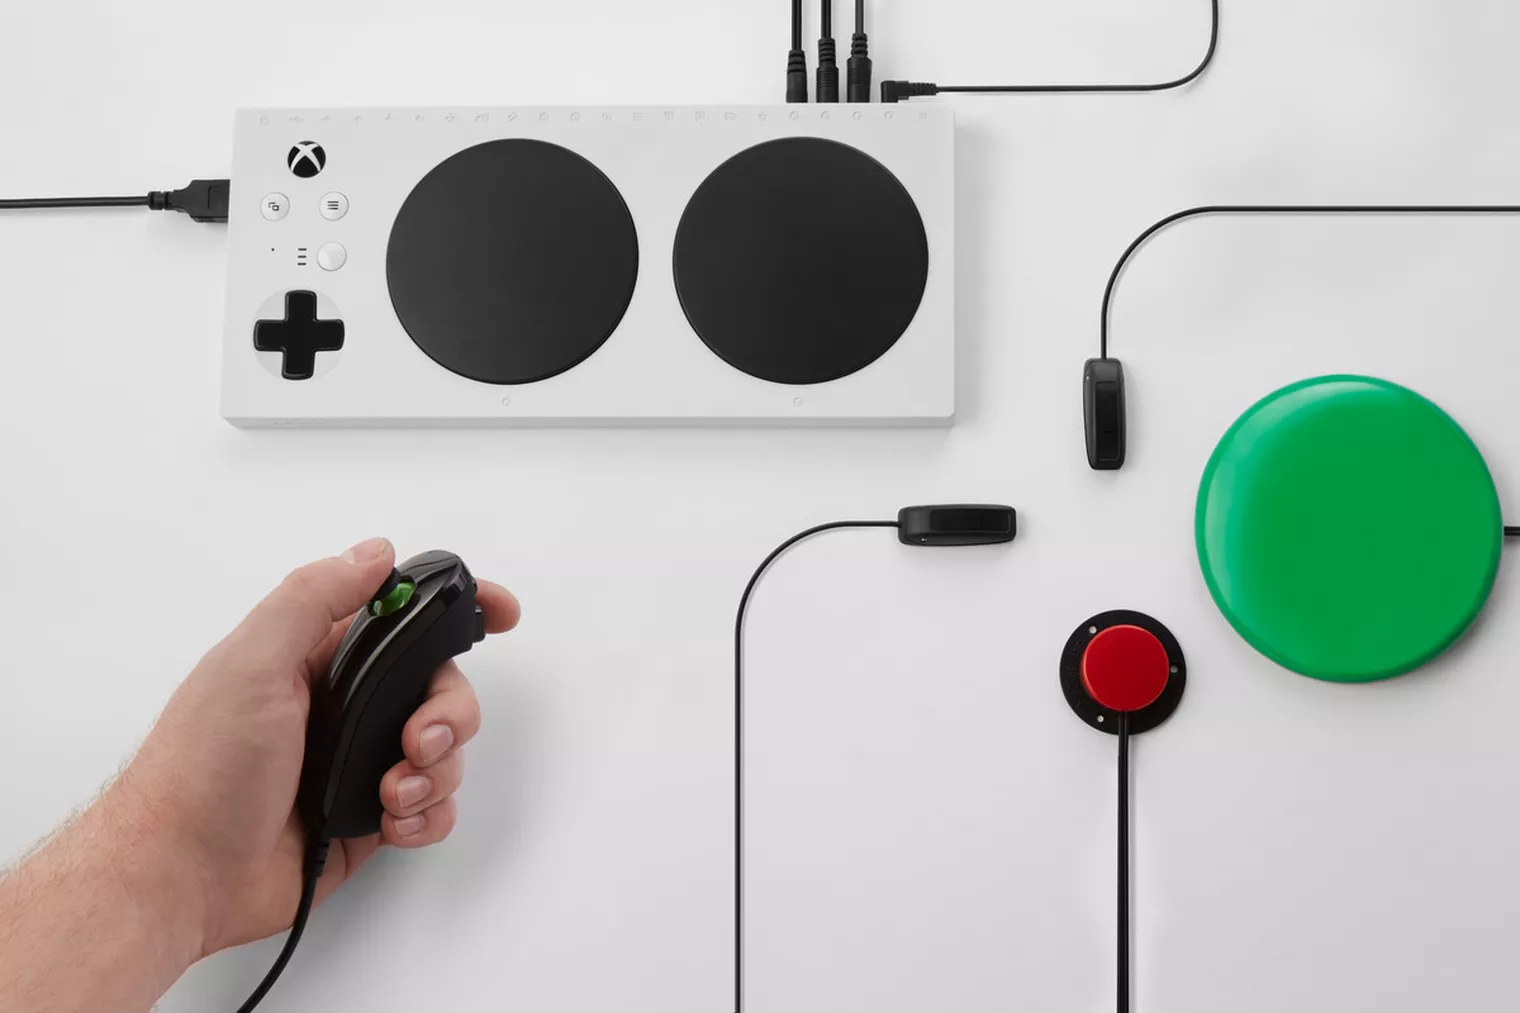 Xbox Adaptive Controller, connected to several other switches and controllers that are also supported as alernative input sources